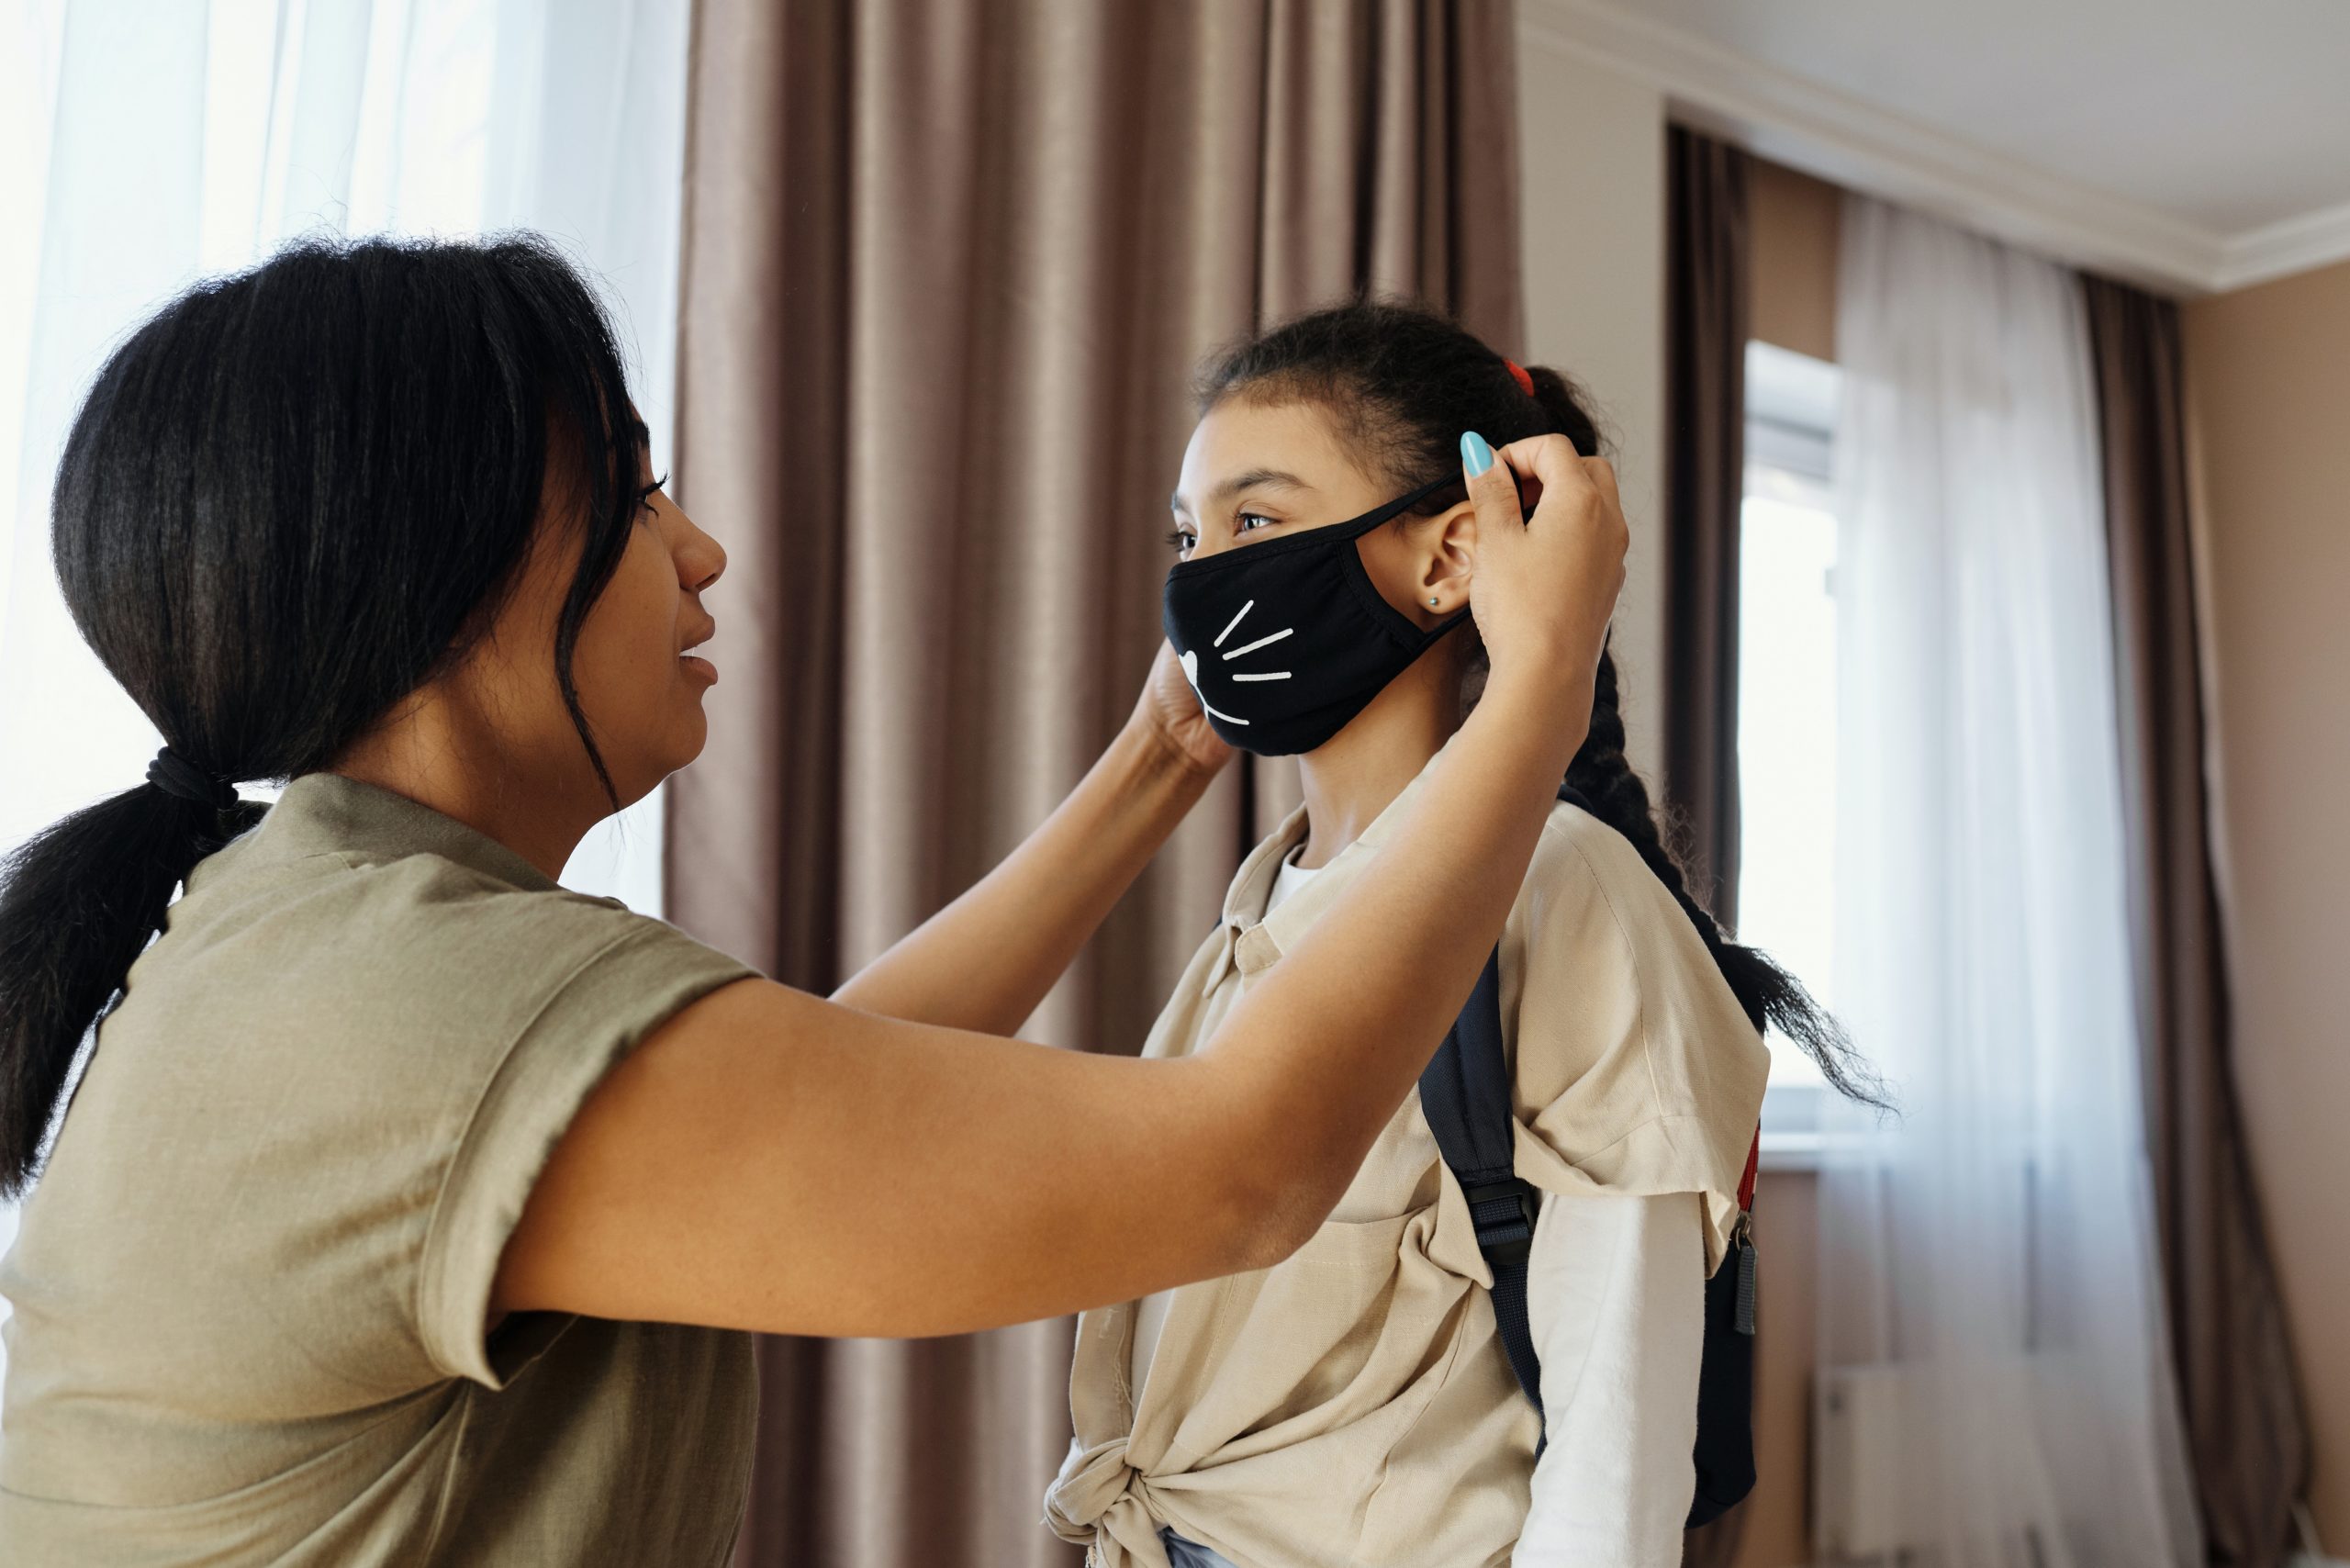 Mother putting COVID-19 mask on child